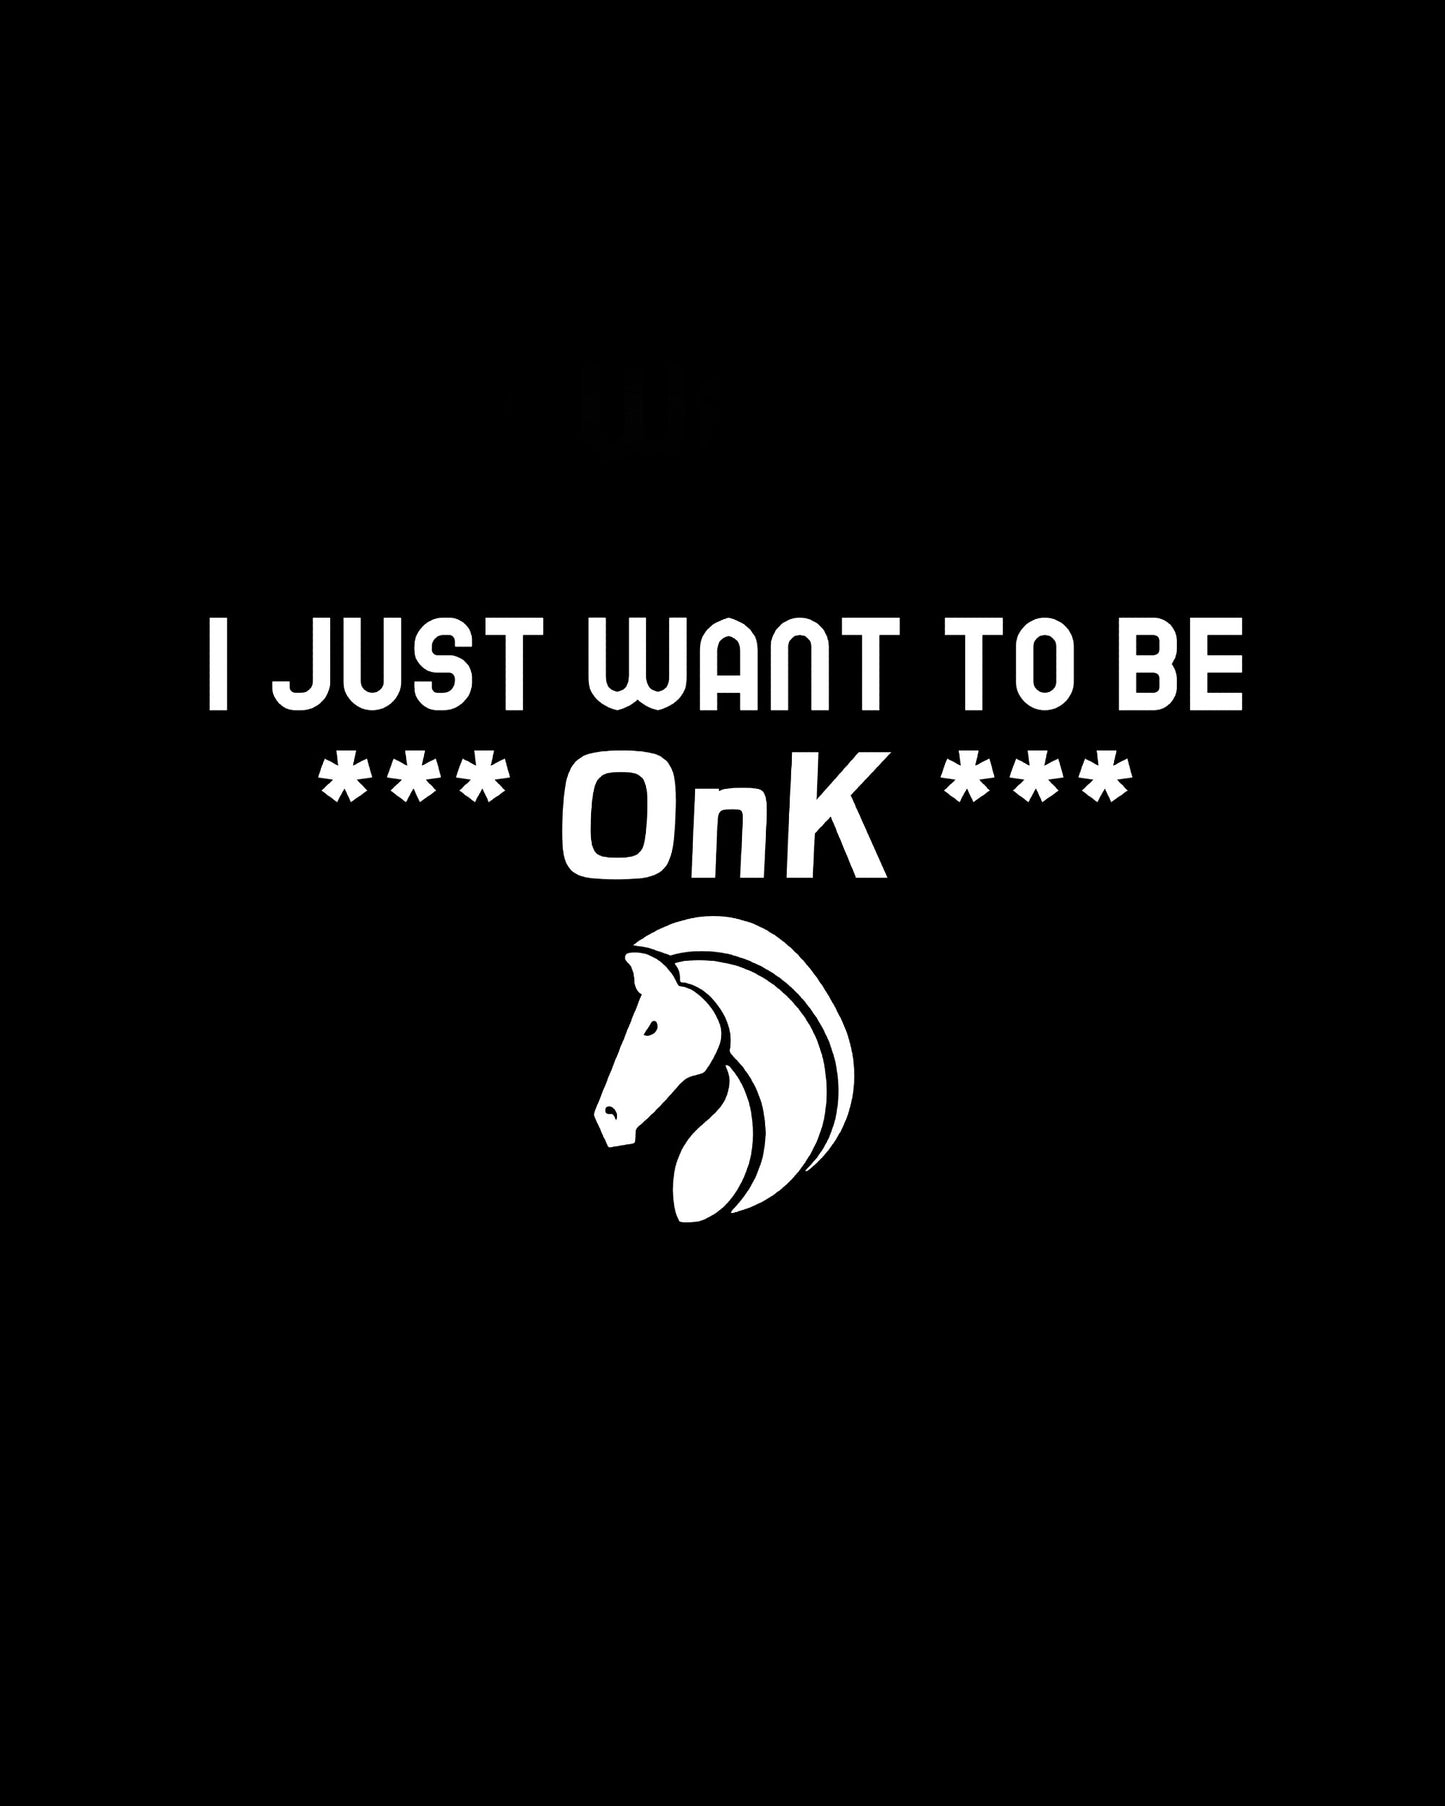 I just want to be OnK